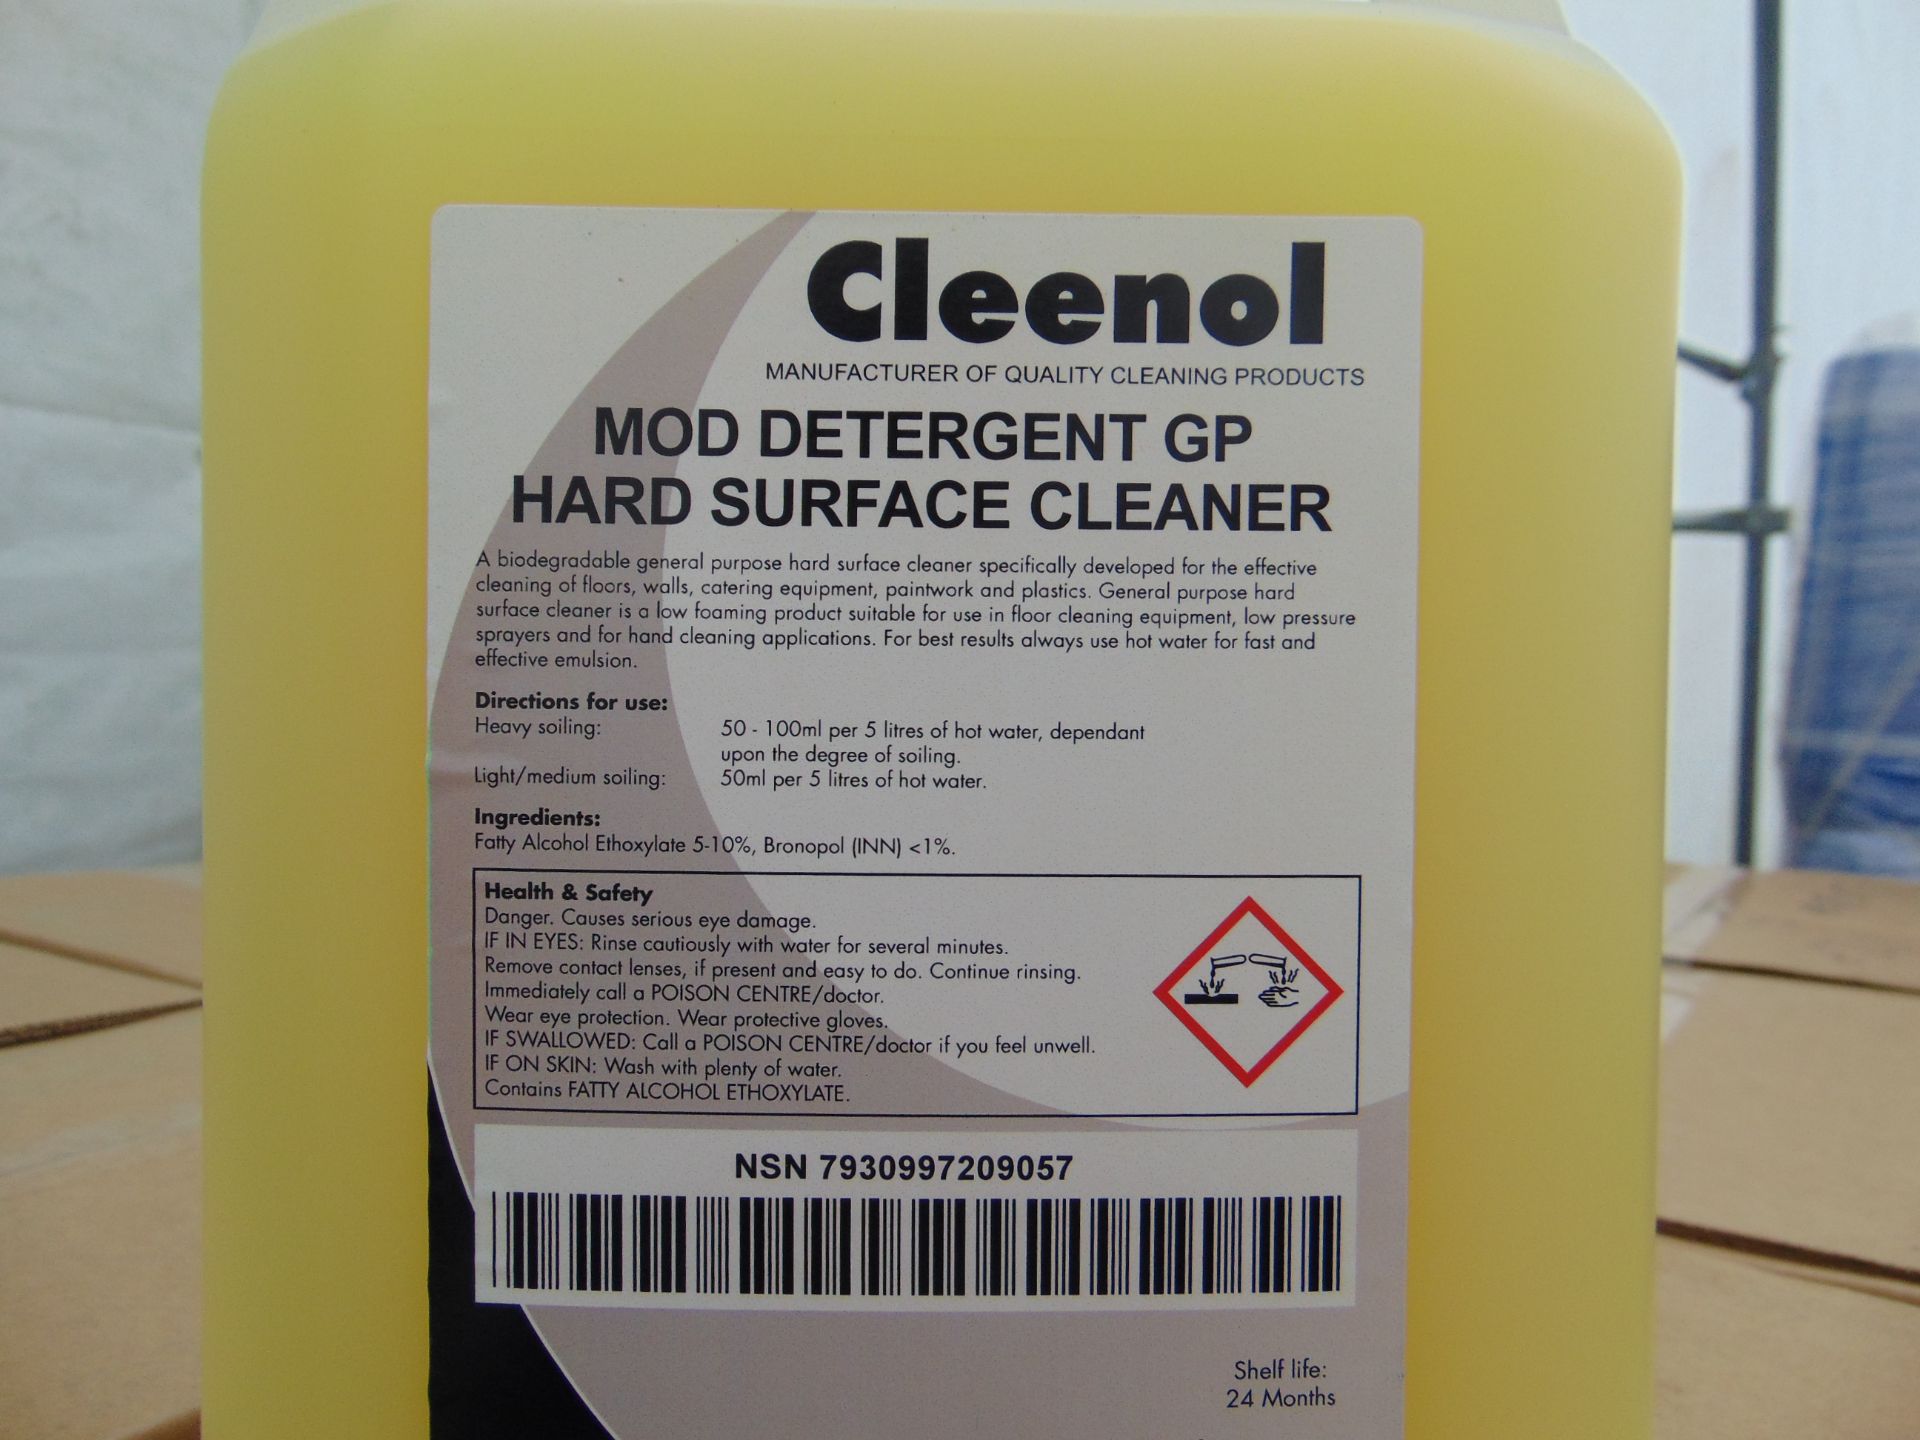 40x 5 Litre Drums of Cleenol Detergent General Purpose Hard Surface Cleaner - Image 3 of 4